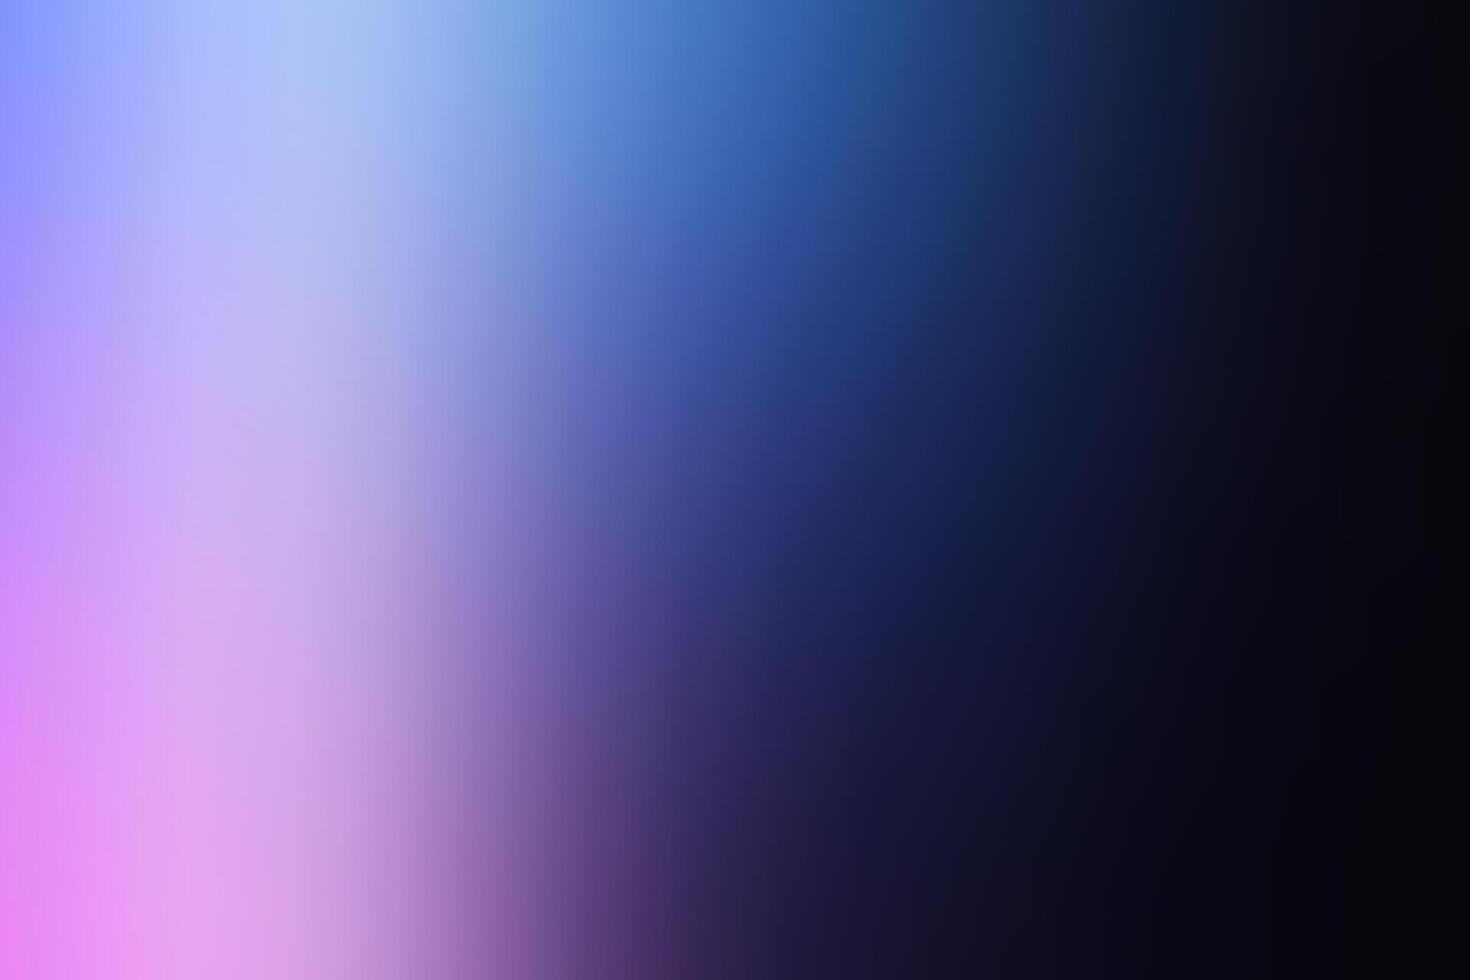 Blurry Colorful Gradient Soft Motion Bright Light Background vector